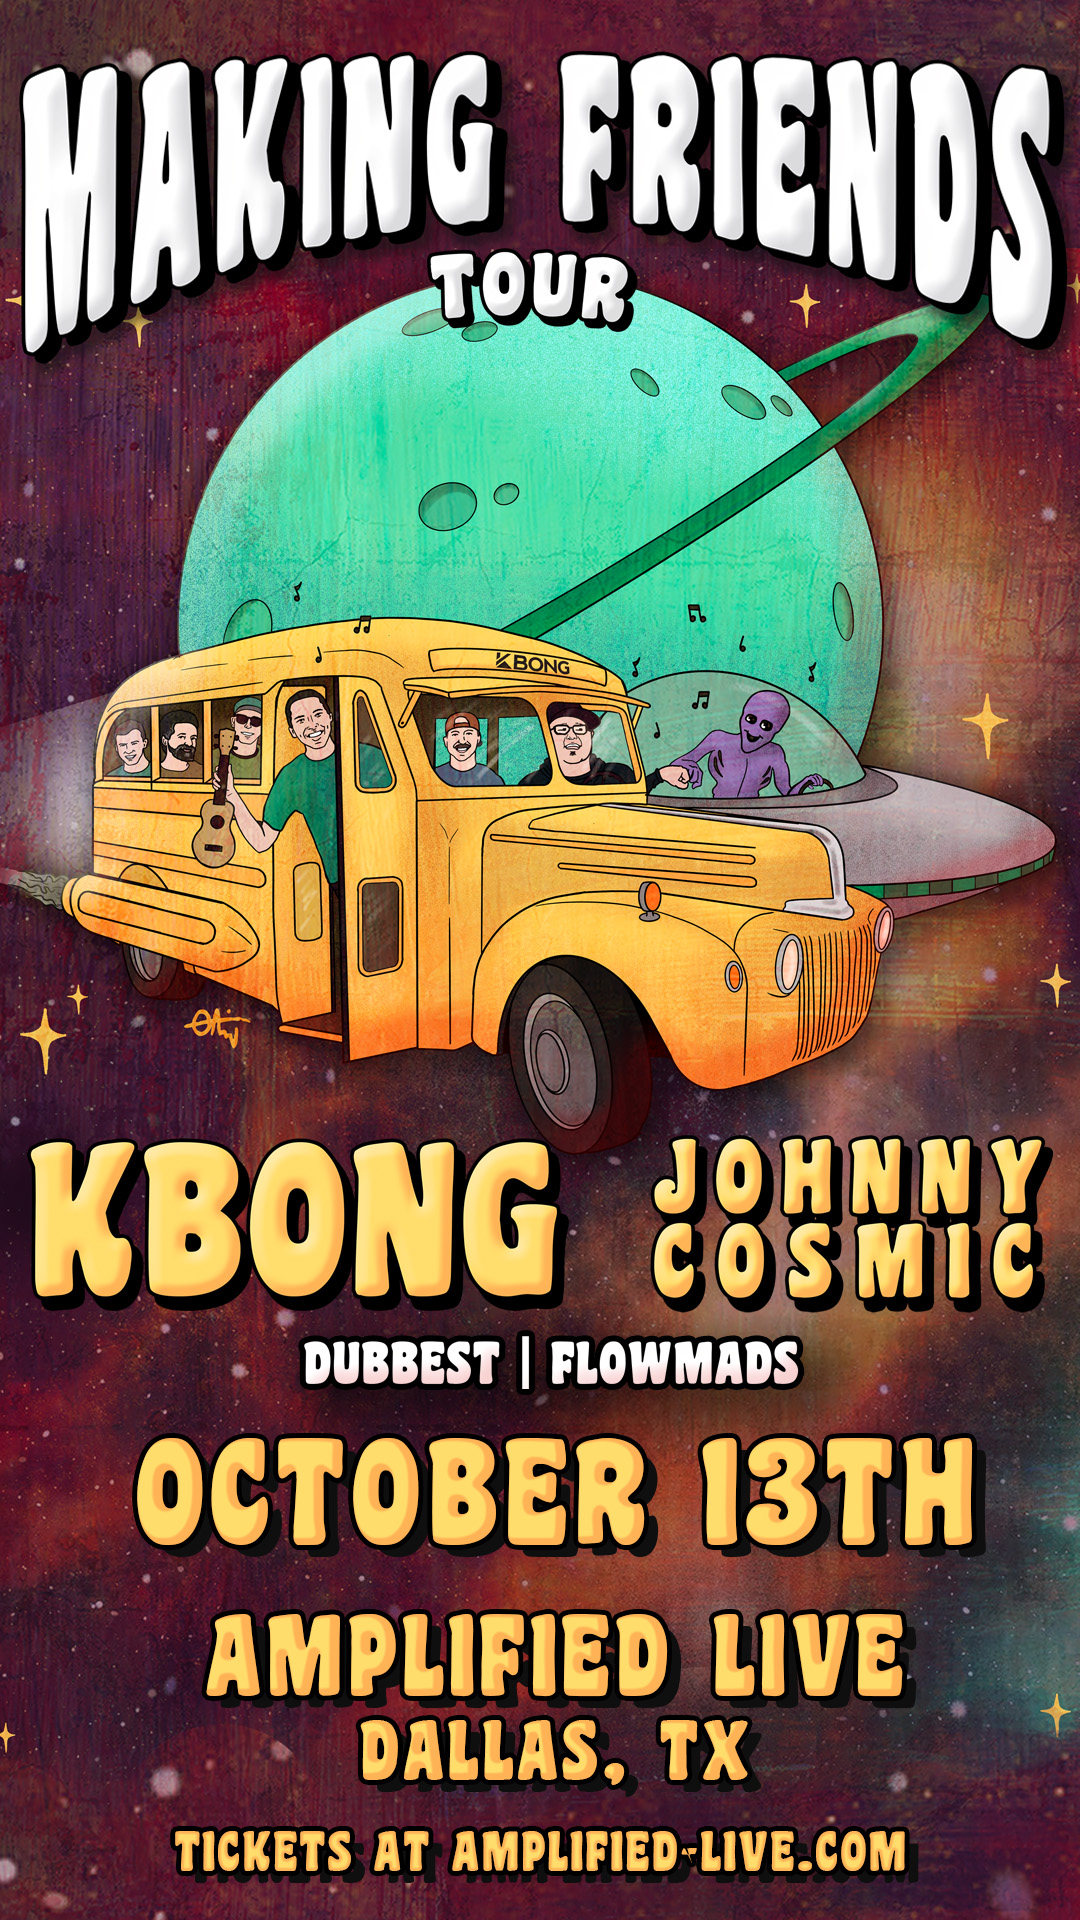 KBong and Johnny Cosmic